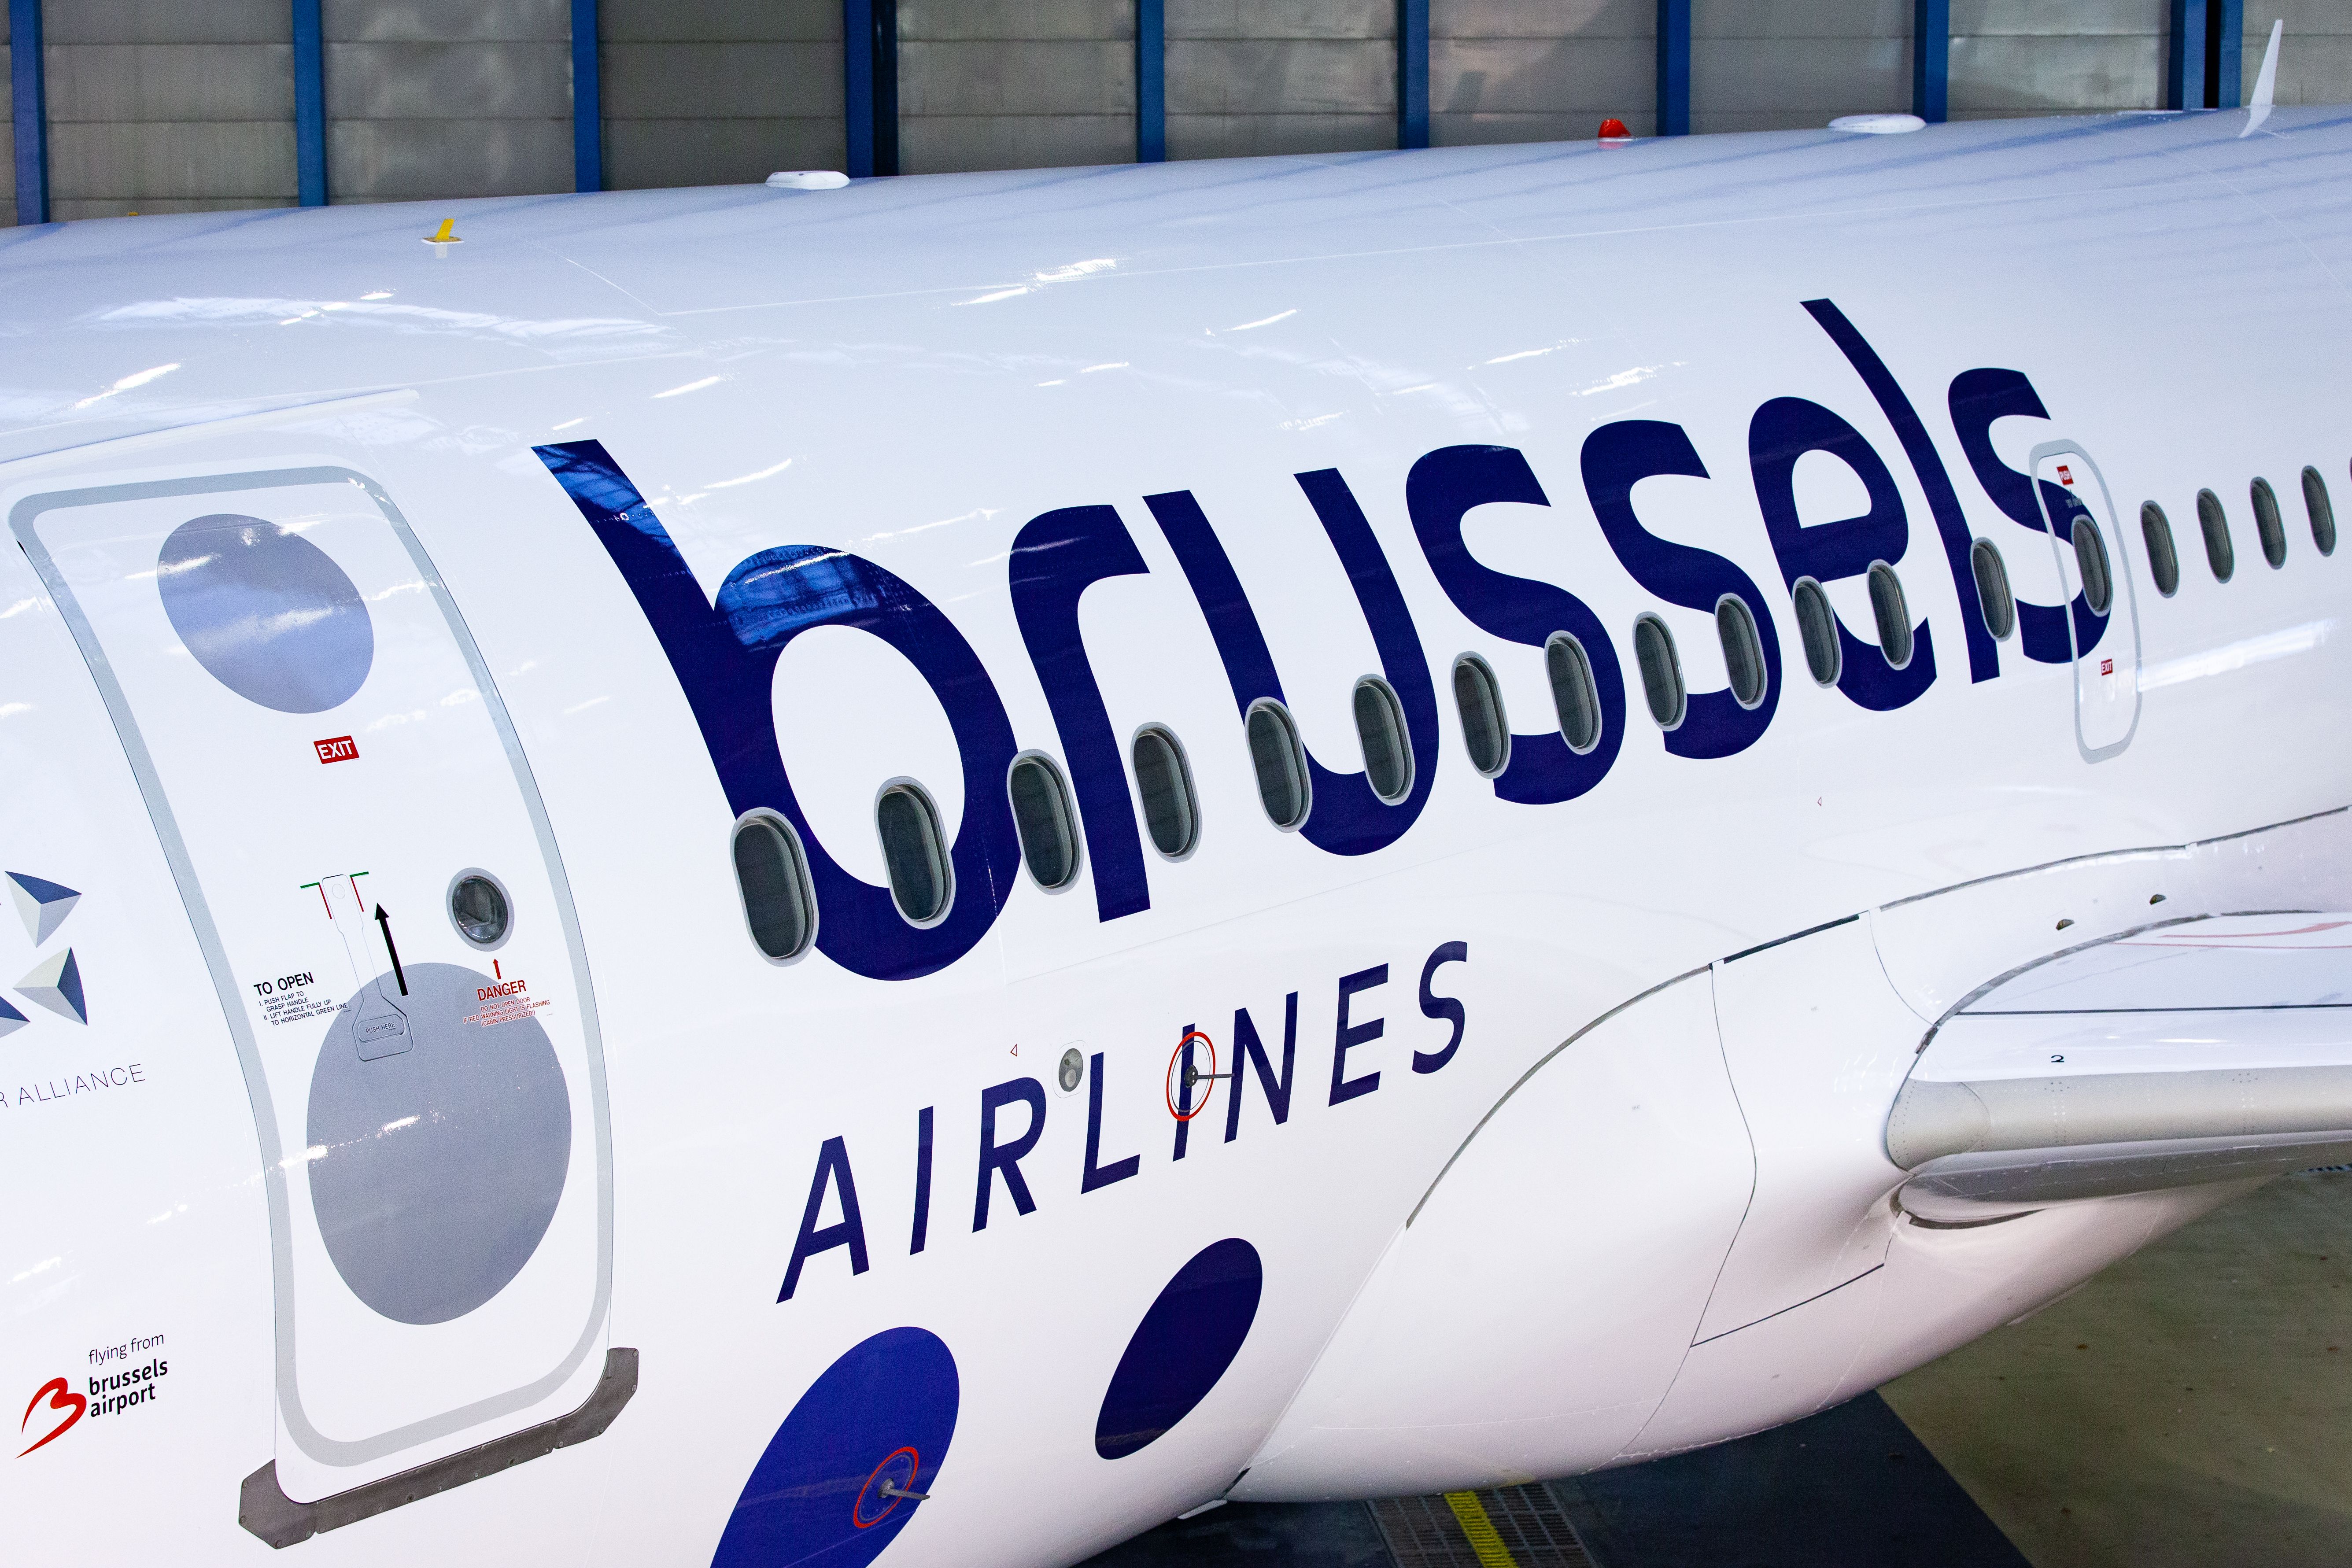 BrusselsAirlines_BIRD-16 - new Bussels Airlines logo on Airbus A319